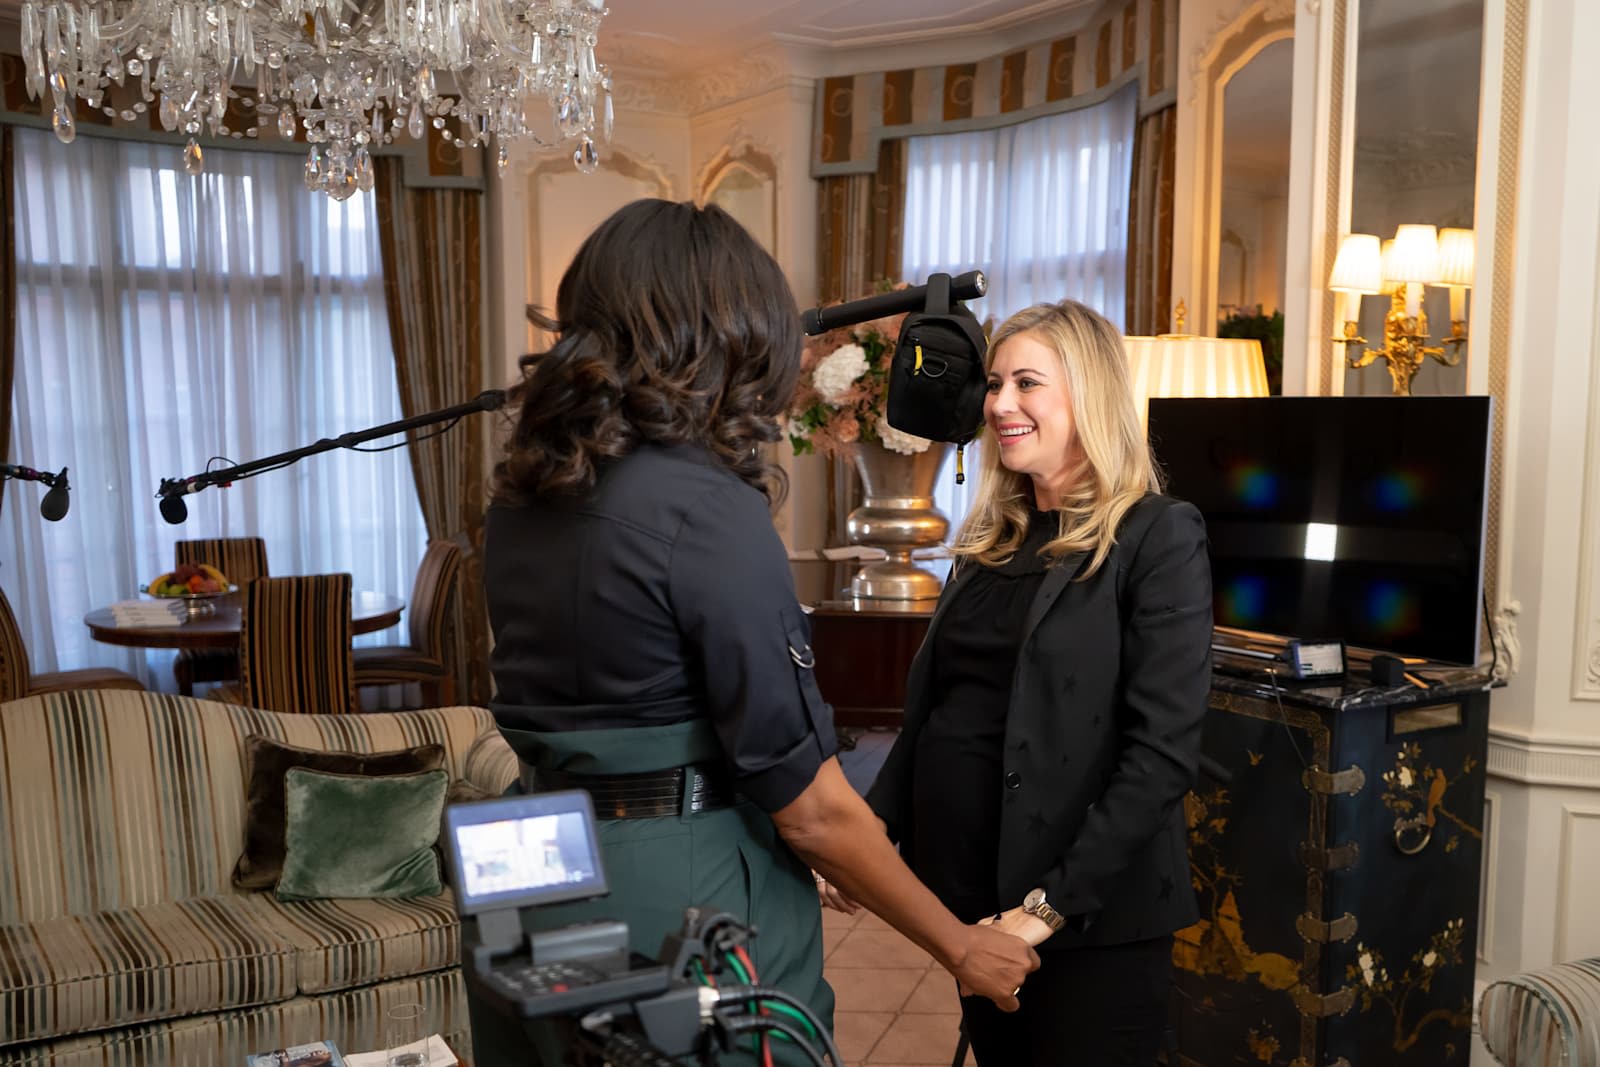 Holly Branson smiling at Michelle Obama with camera equipment in the background